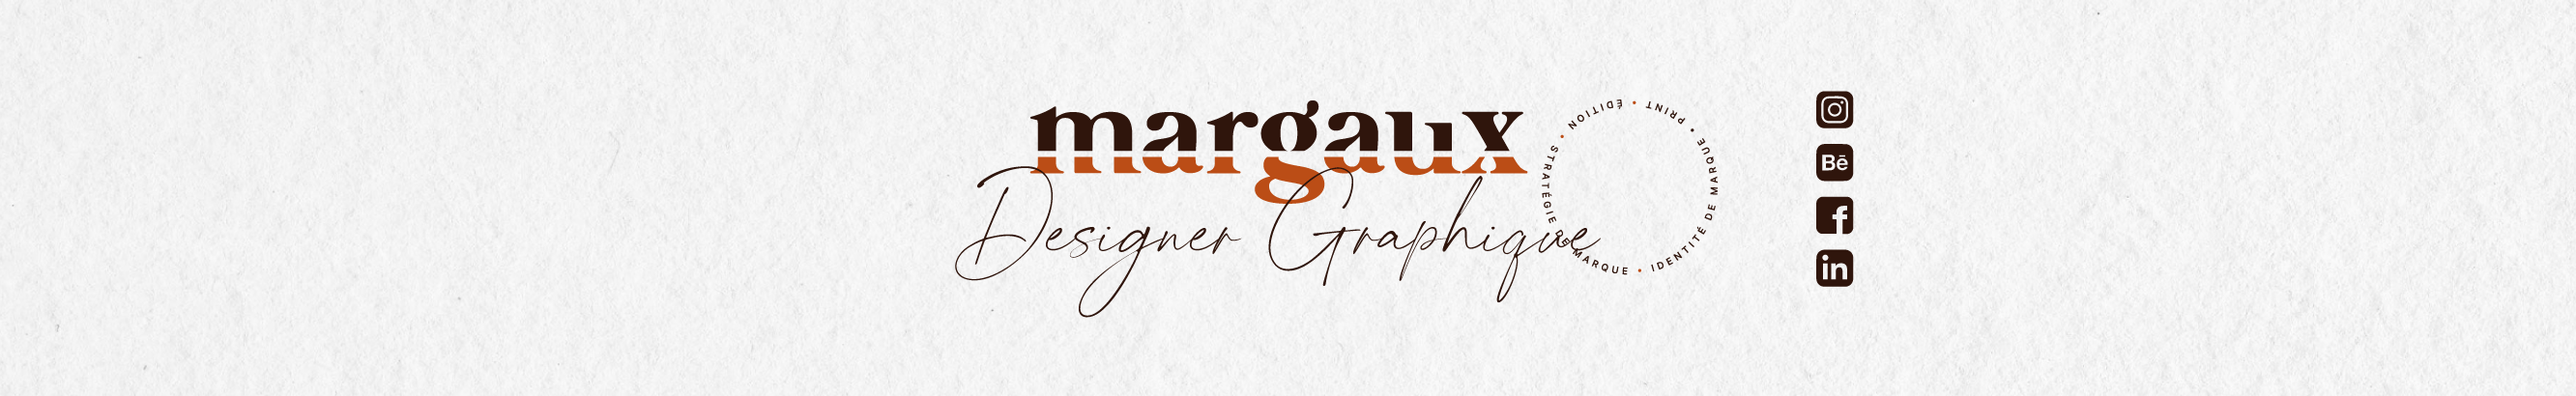 Margaux Coutellier's profile banner